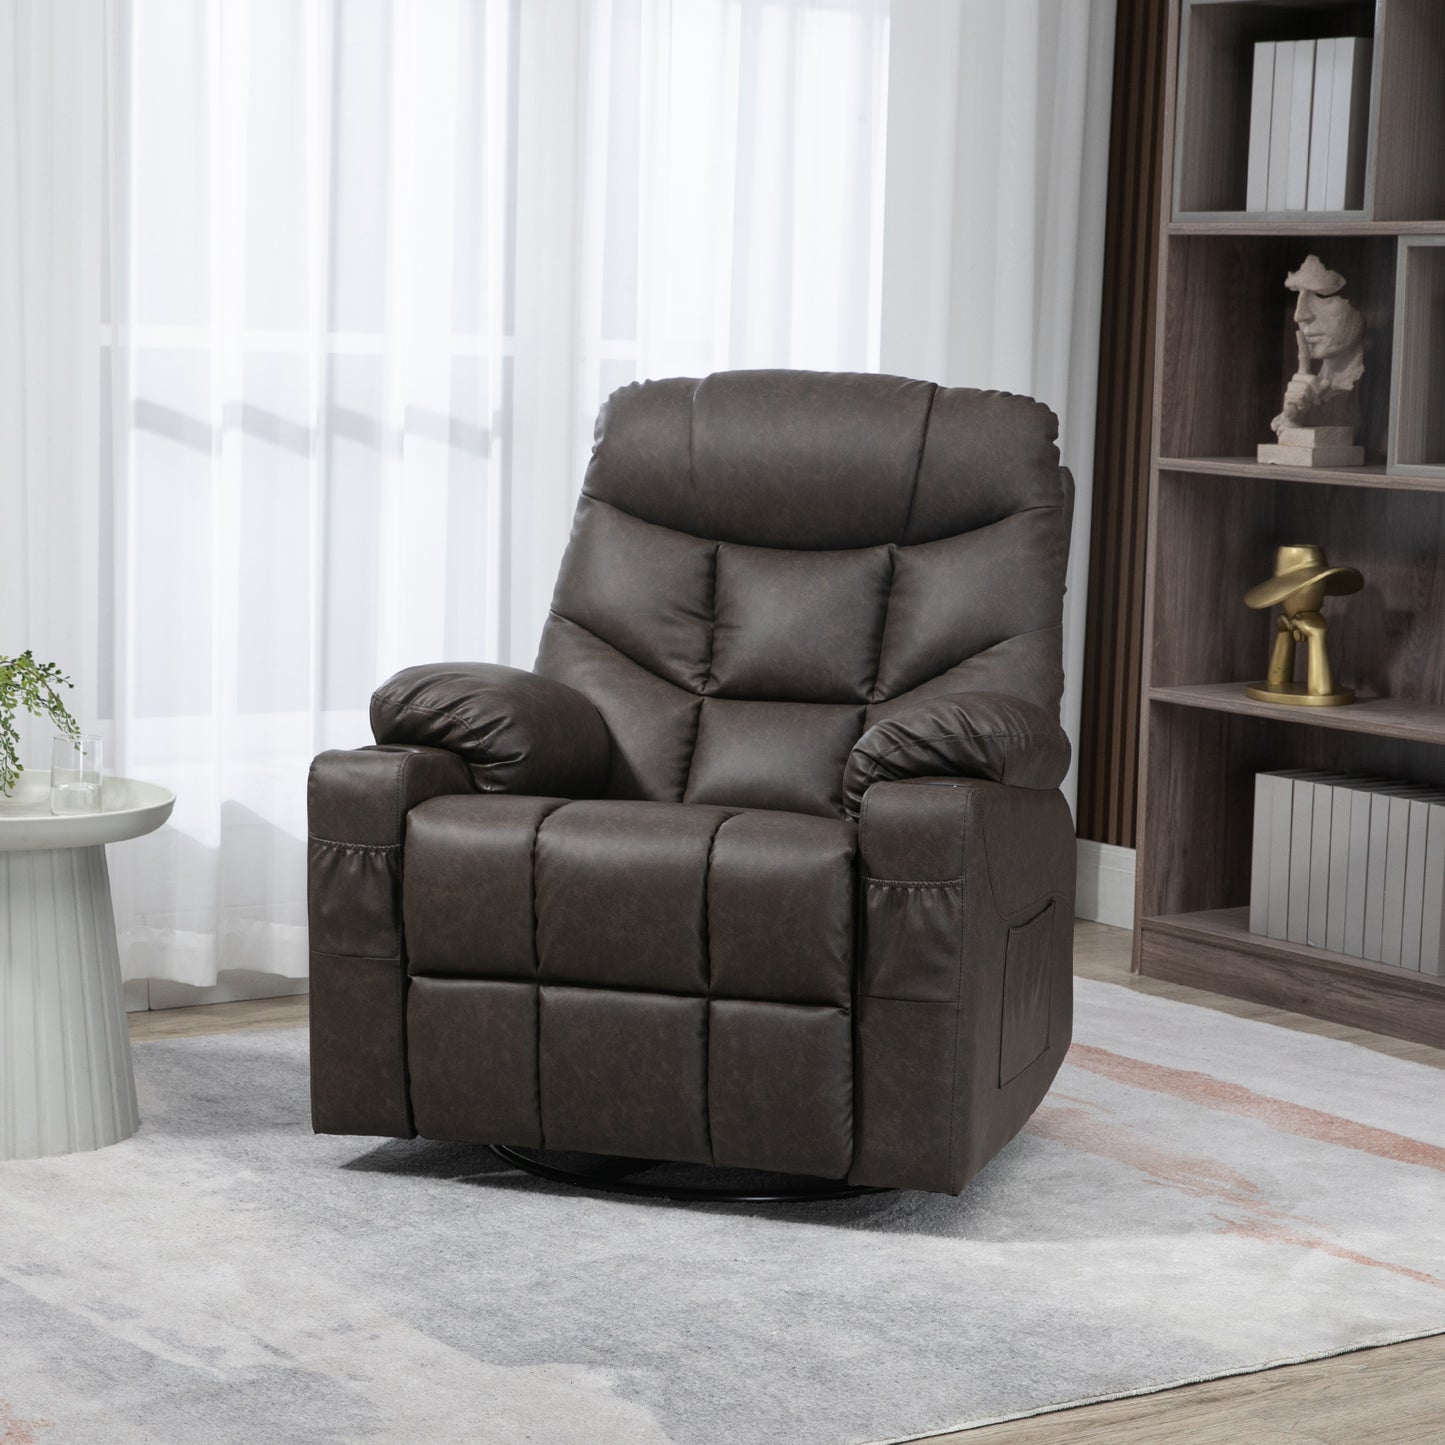 HOMCOM Manual Reclining Chair, Recliner Armchair with Faux Leather, Footrest, Cup Holders, 86x93x102cm, Brown